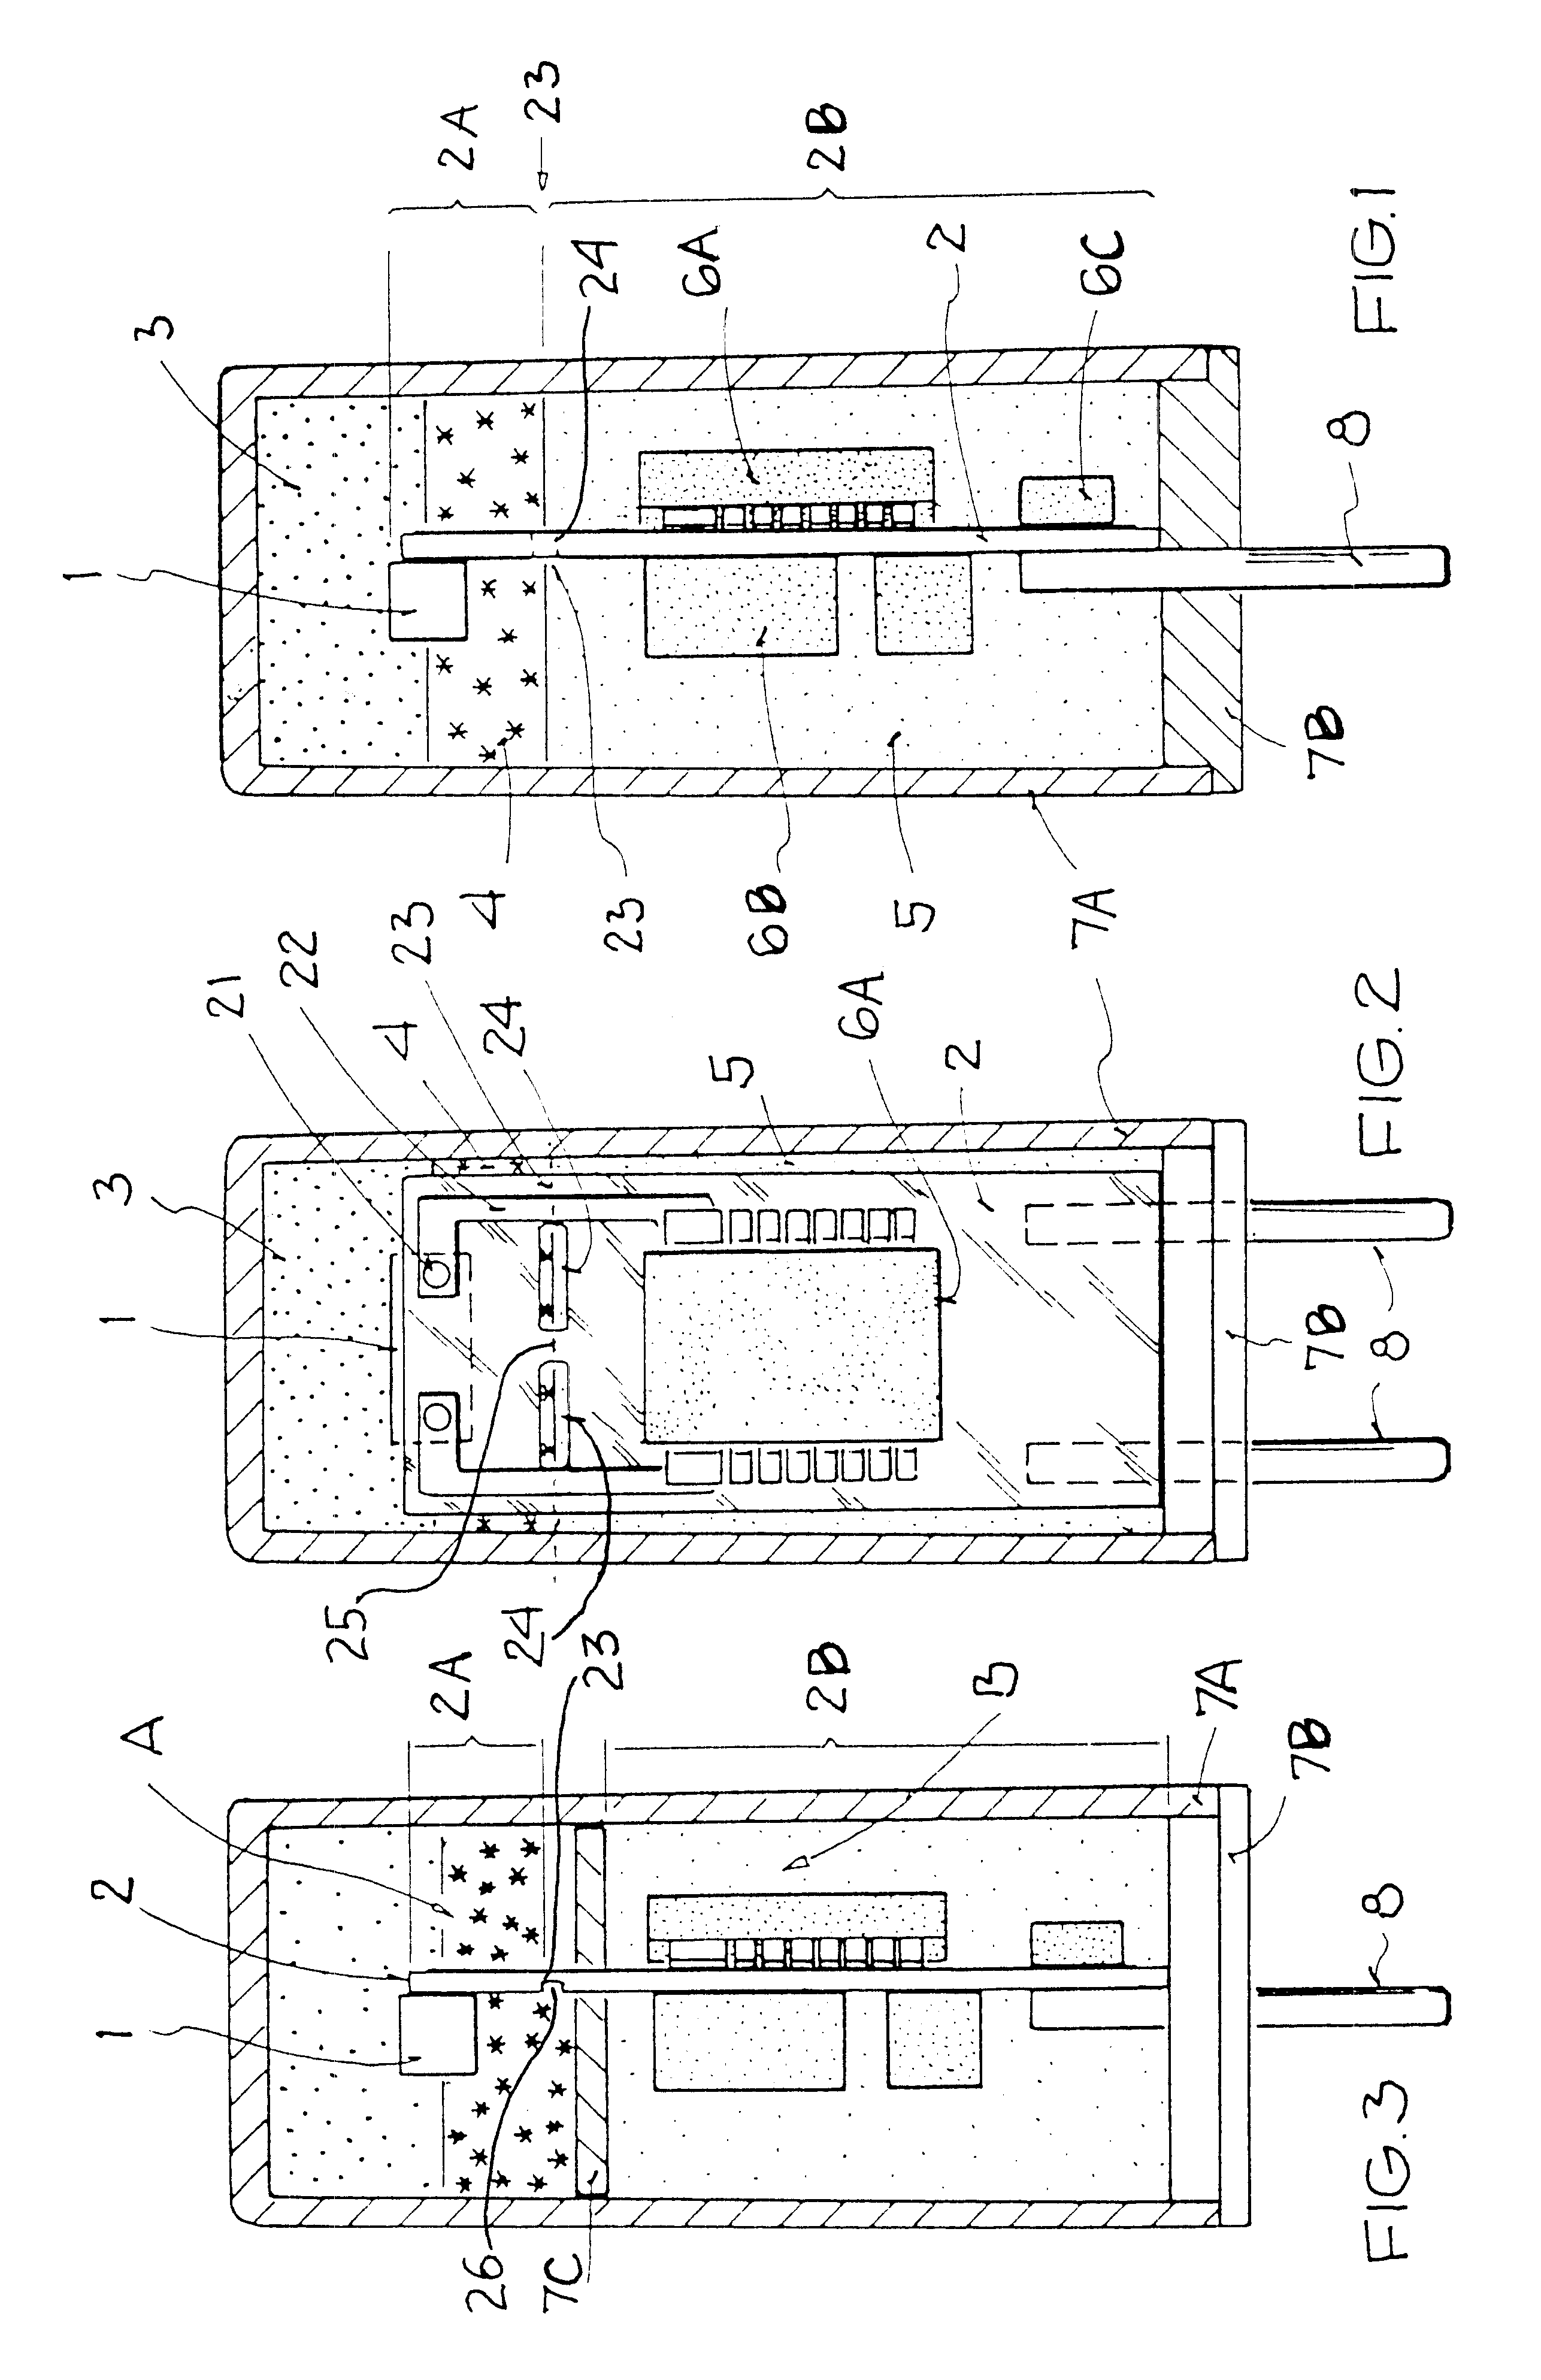 Pyrotechnic igniter arrangement with integrated mechanically decoupled electronic assembly